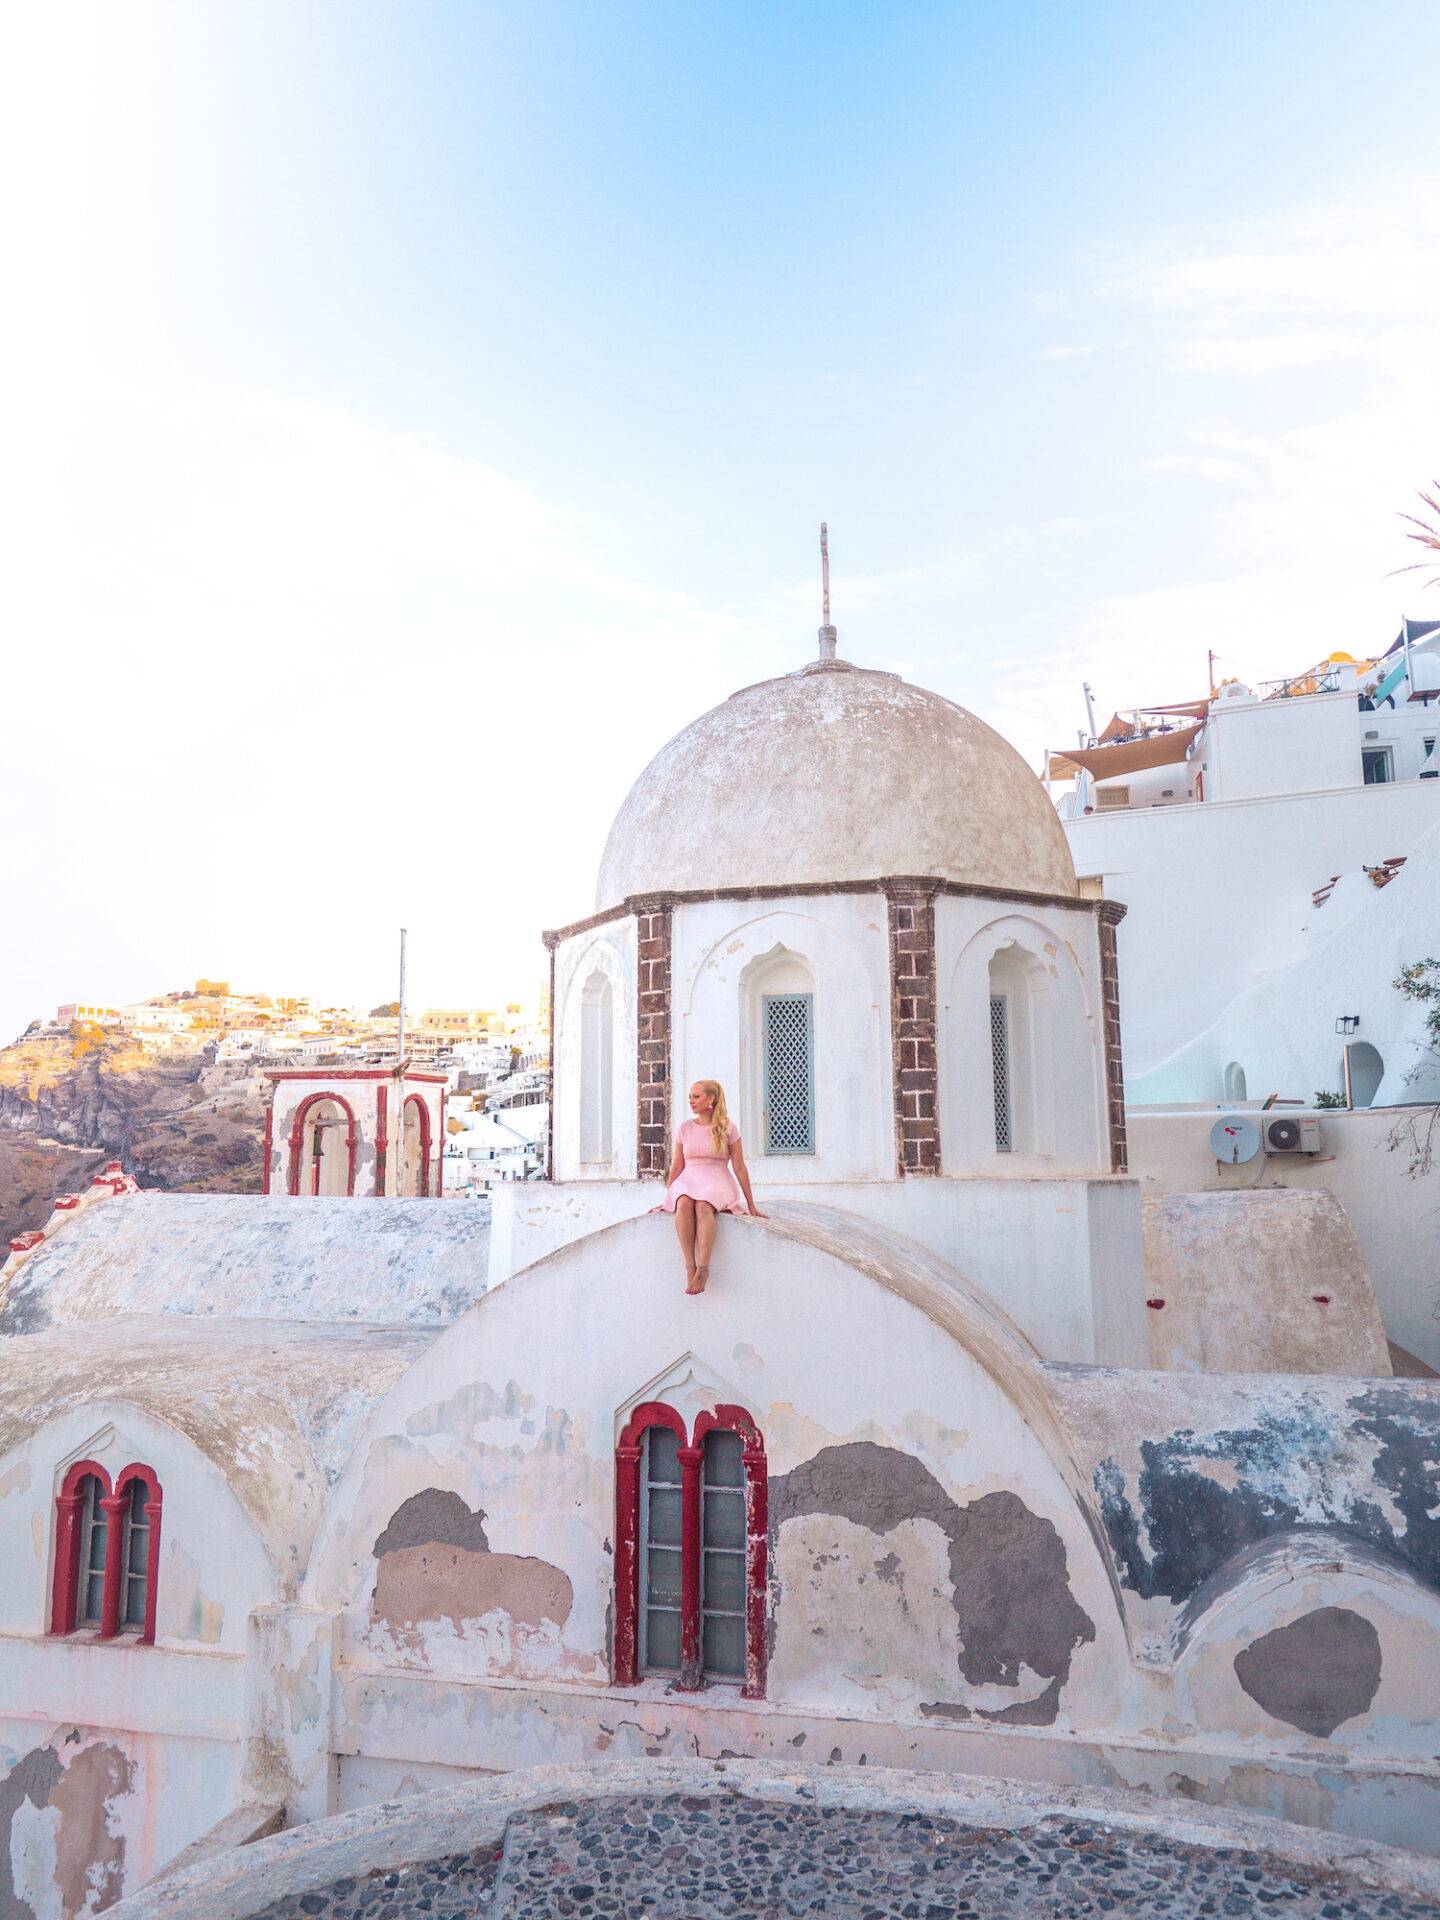 The best photo spots and most instagrammable places in Santorini: Church of St.John the Theologian in Fira. Click the photo to see the rest of my list of the best instagram photo spots in Santorini!